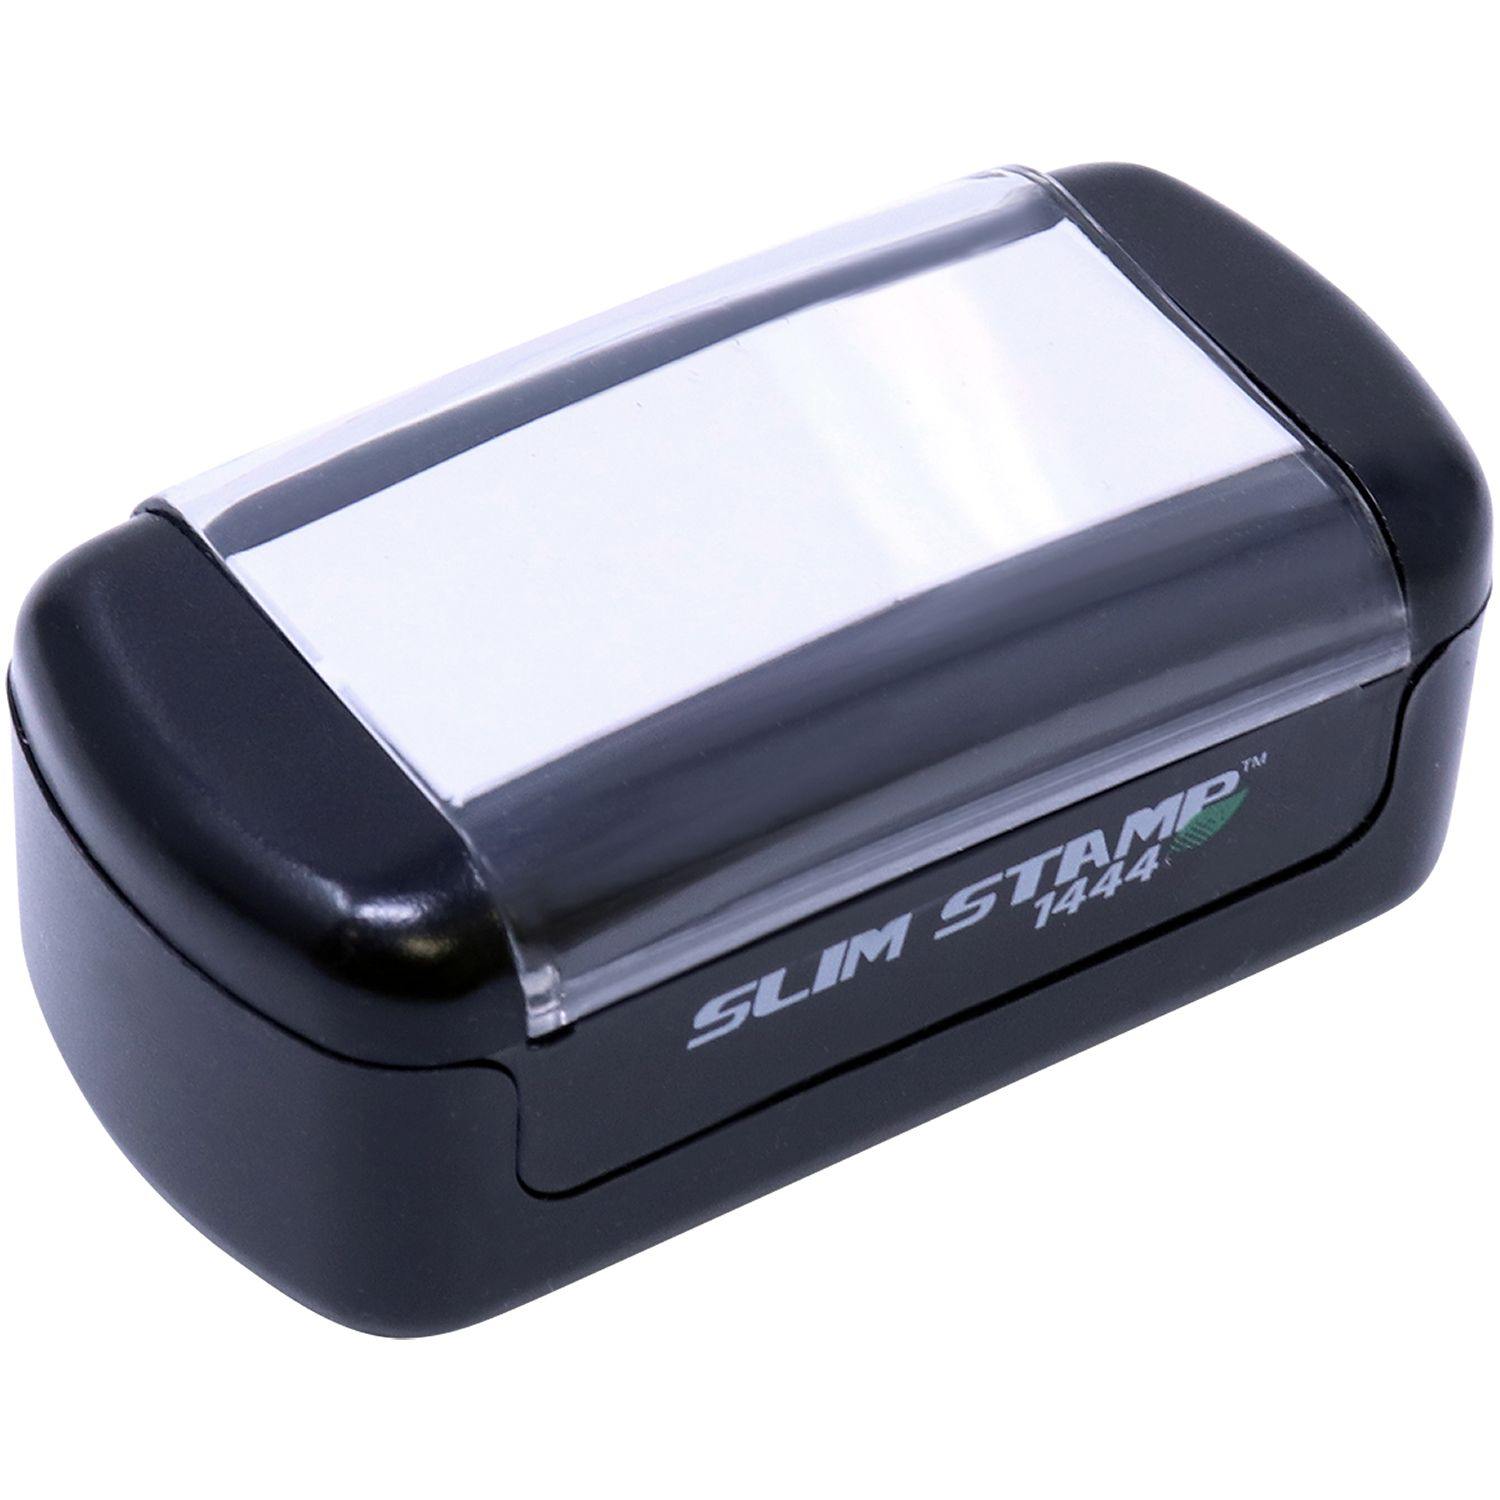 Slim Pre-Inked Additional Postage Required Stamp - Engineer Seal Stamps - Brand_Slim, Impression Size_Small, Stamp Type_Pre-Inked Stamp, Type of Use_Postal & Mailing